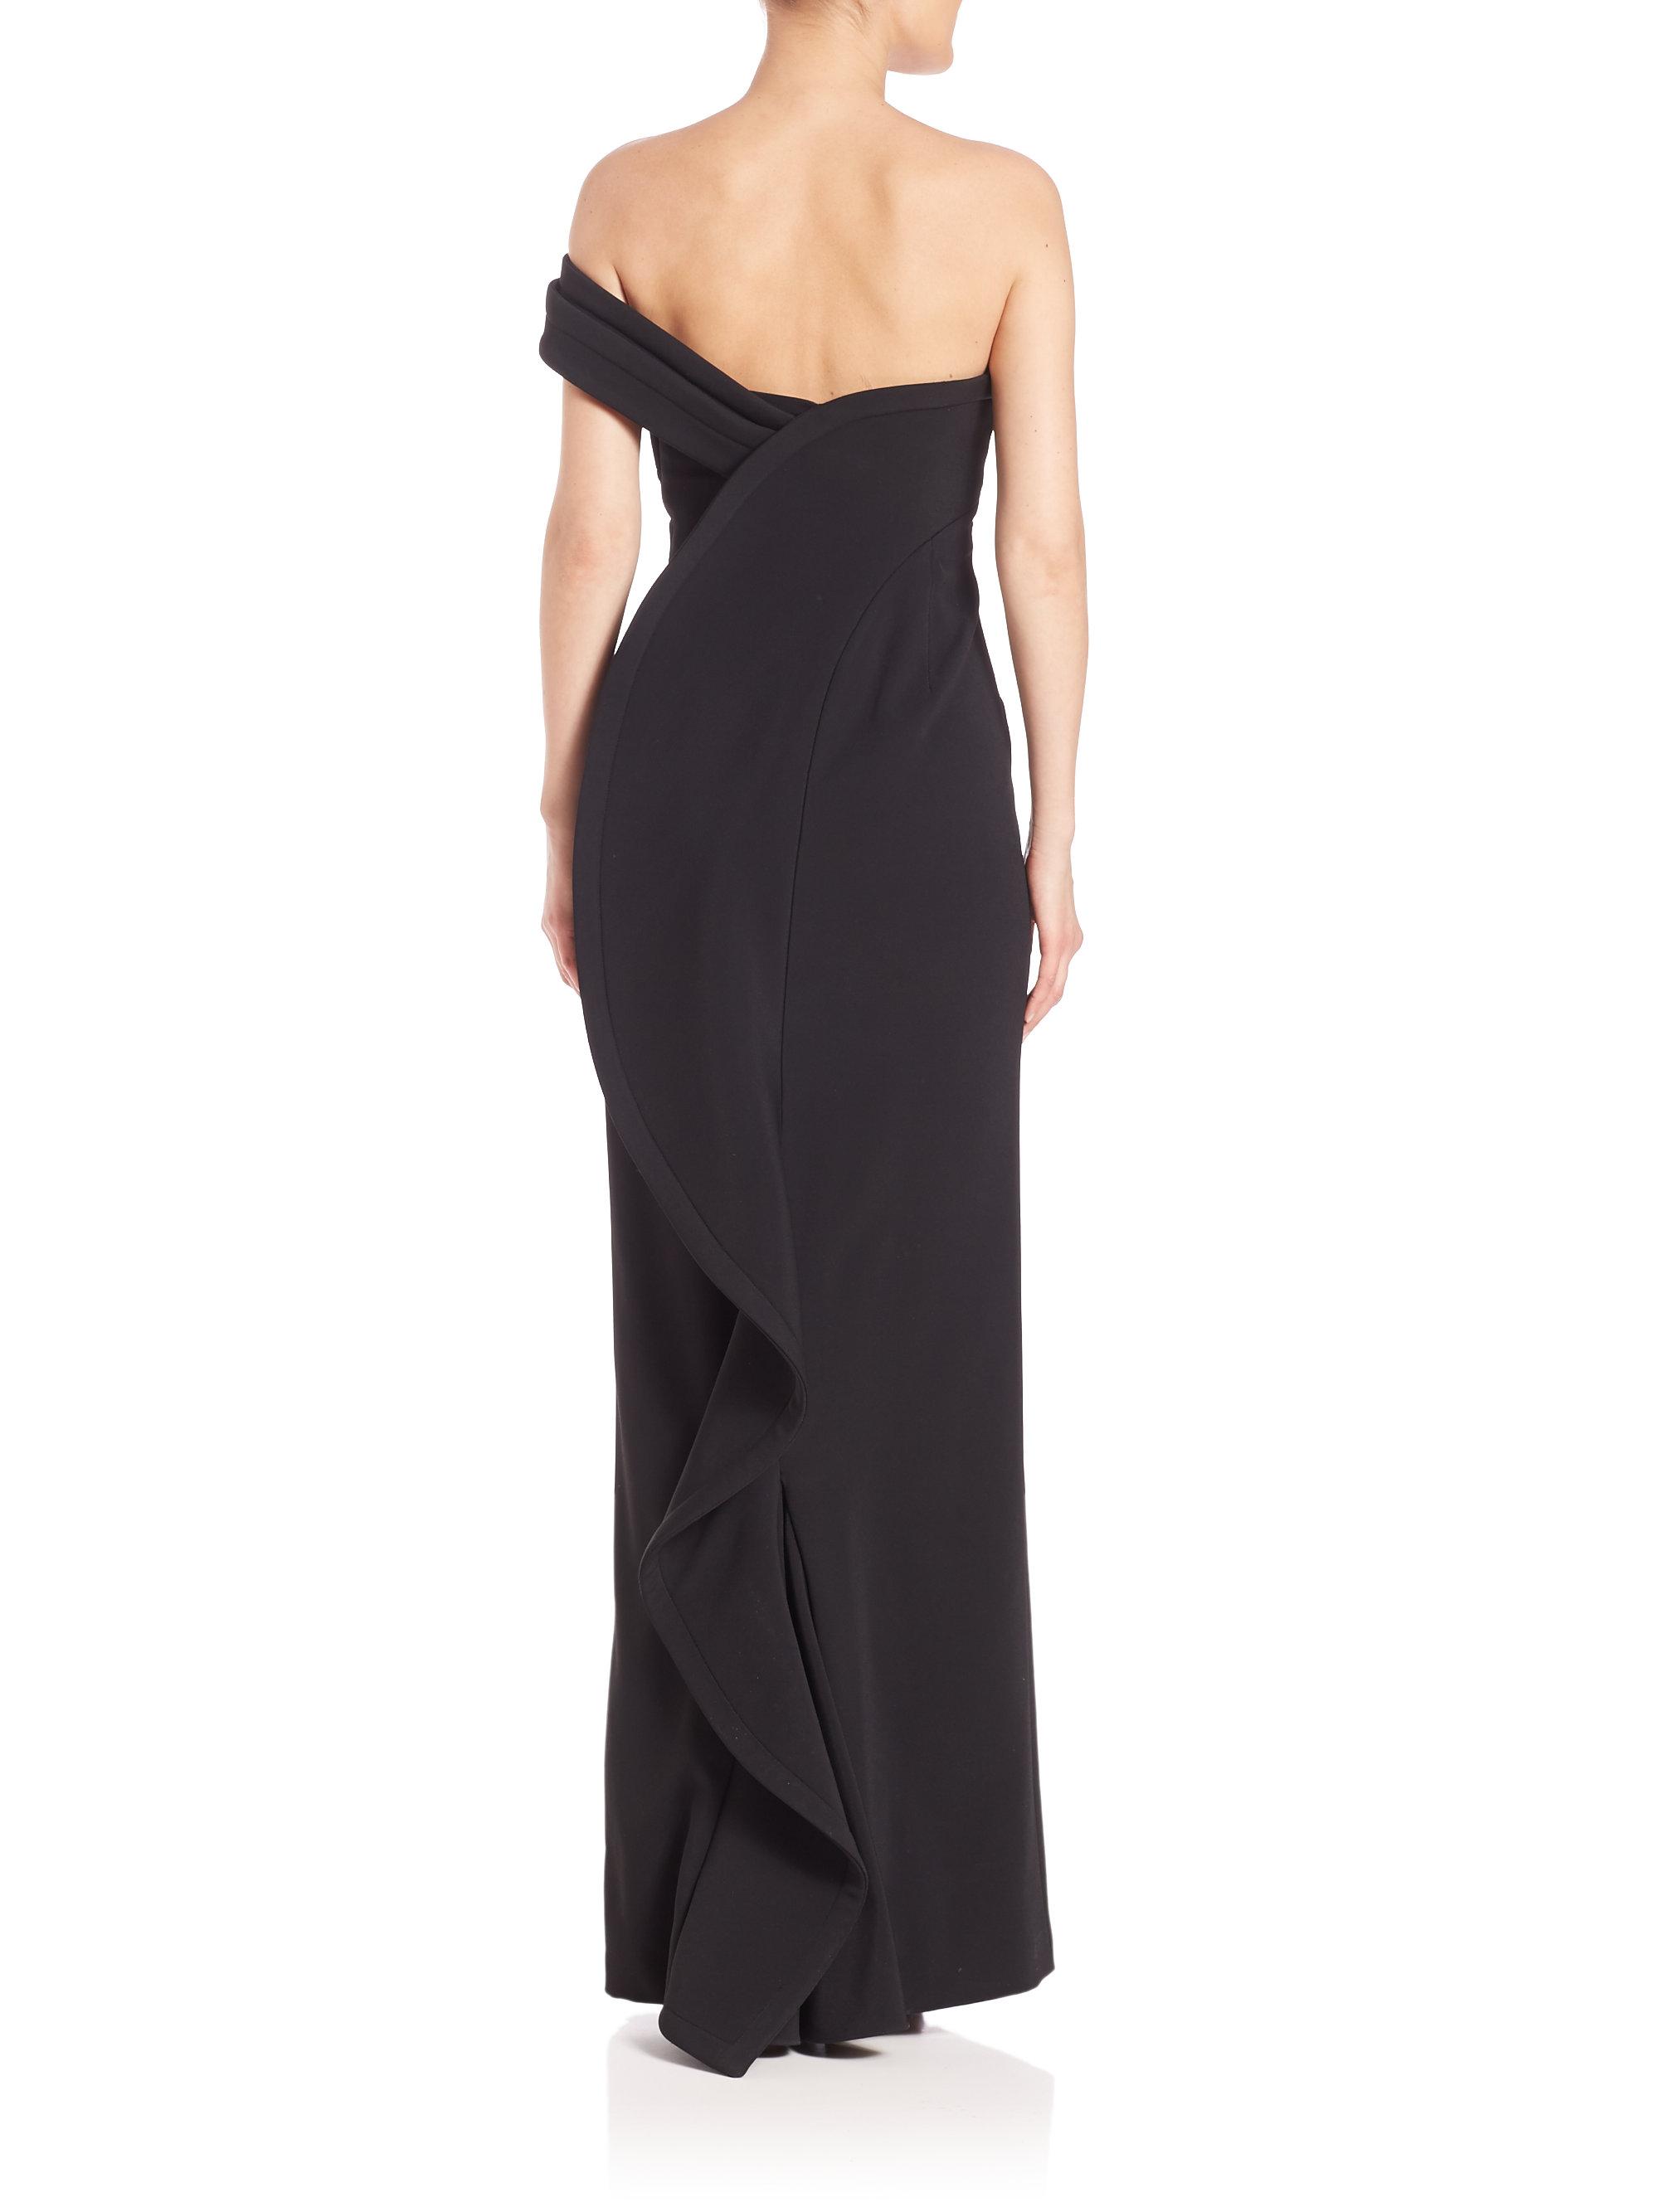 Brandon Maxwell Back-ruffle Off-the-shoulder Gown in Black - Lyst